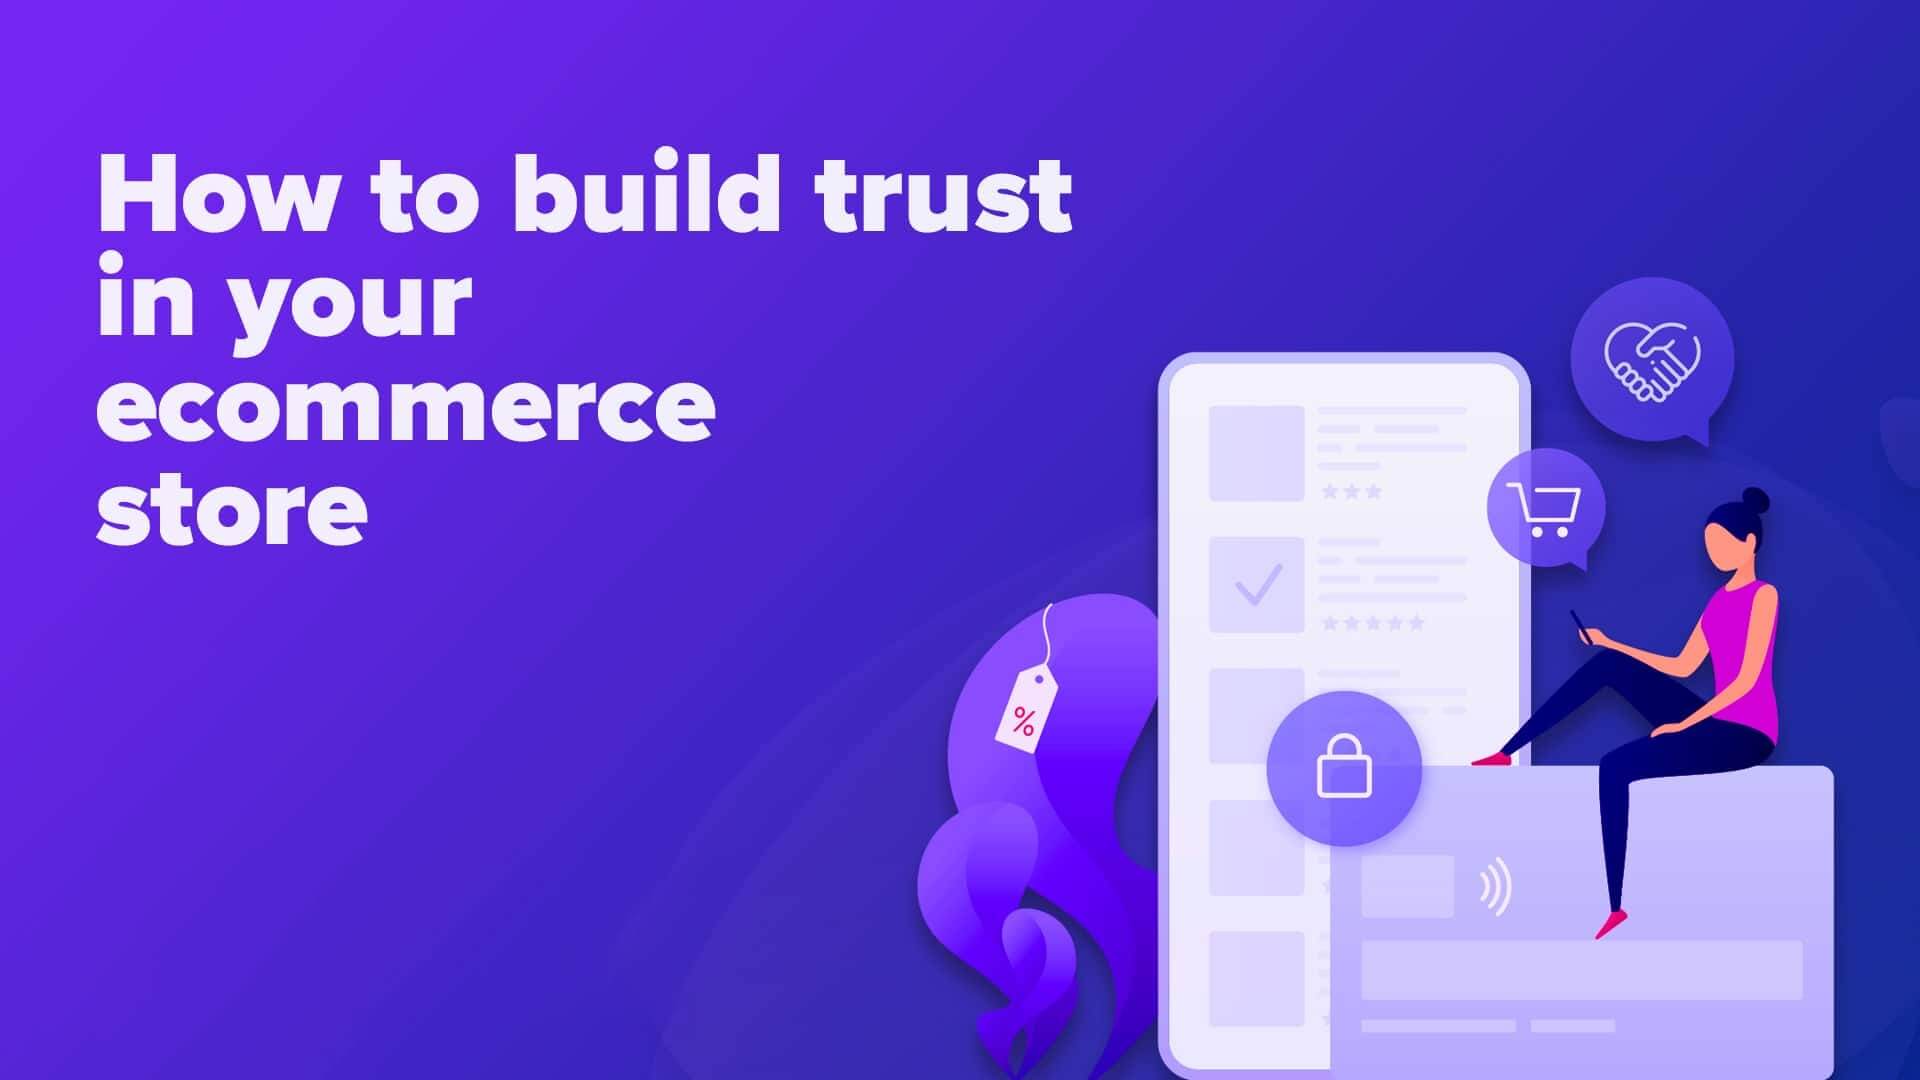 How to build trust in your ecommerce store